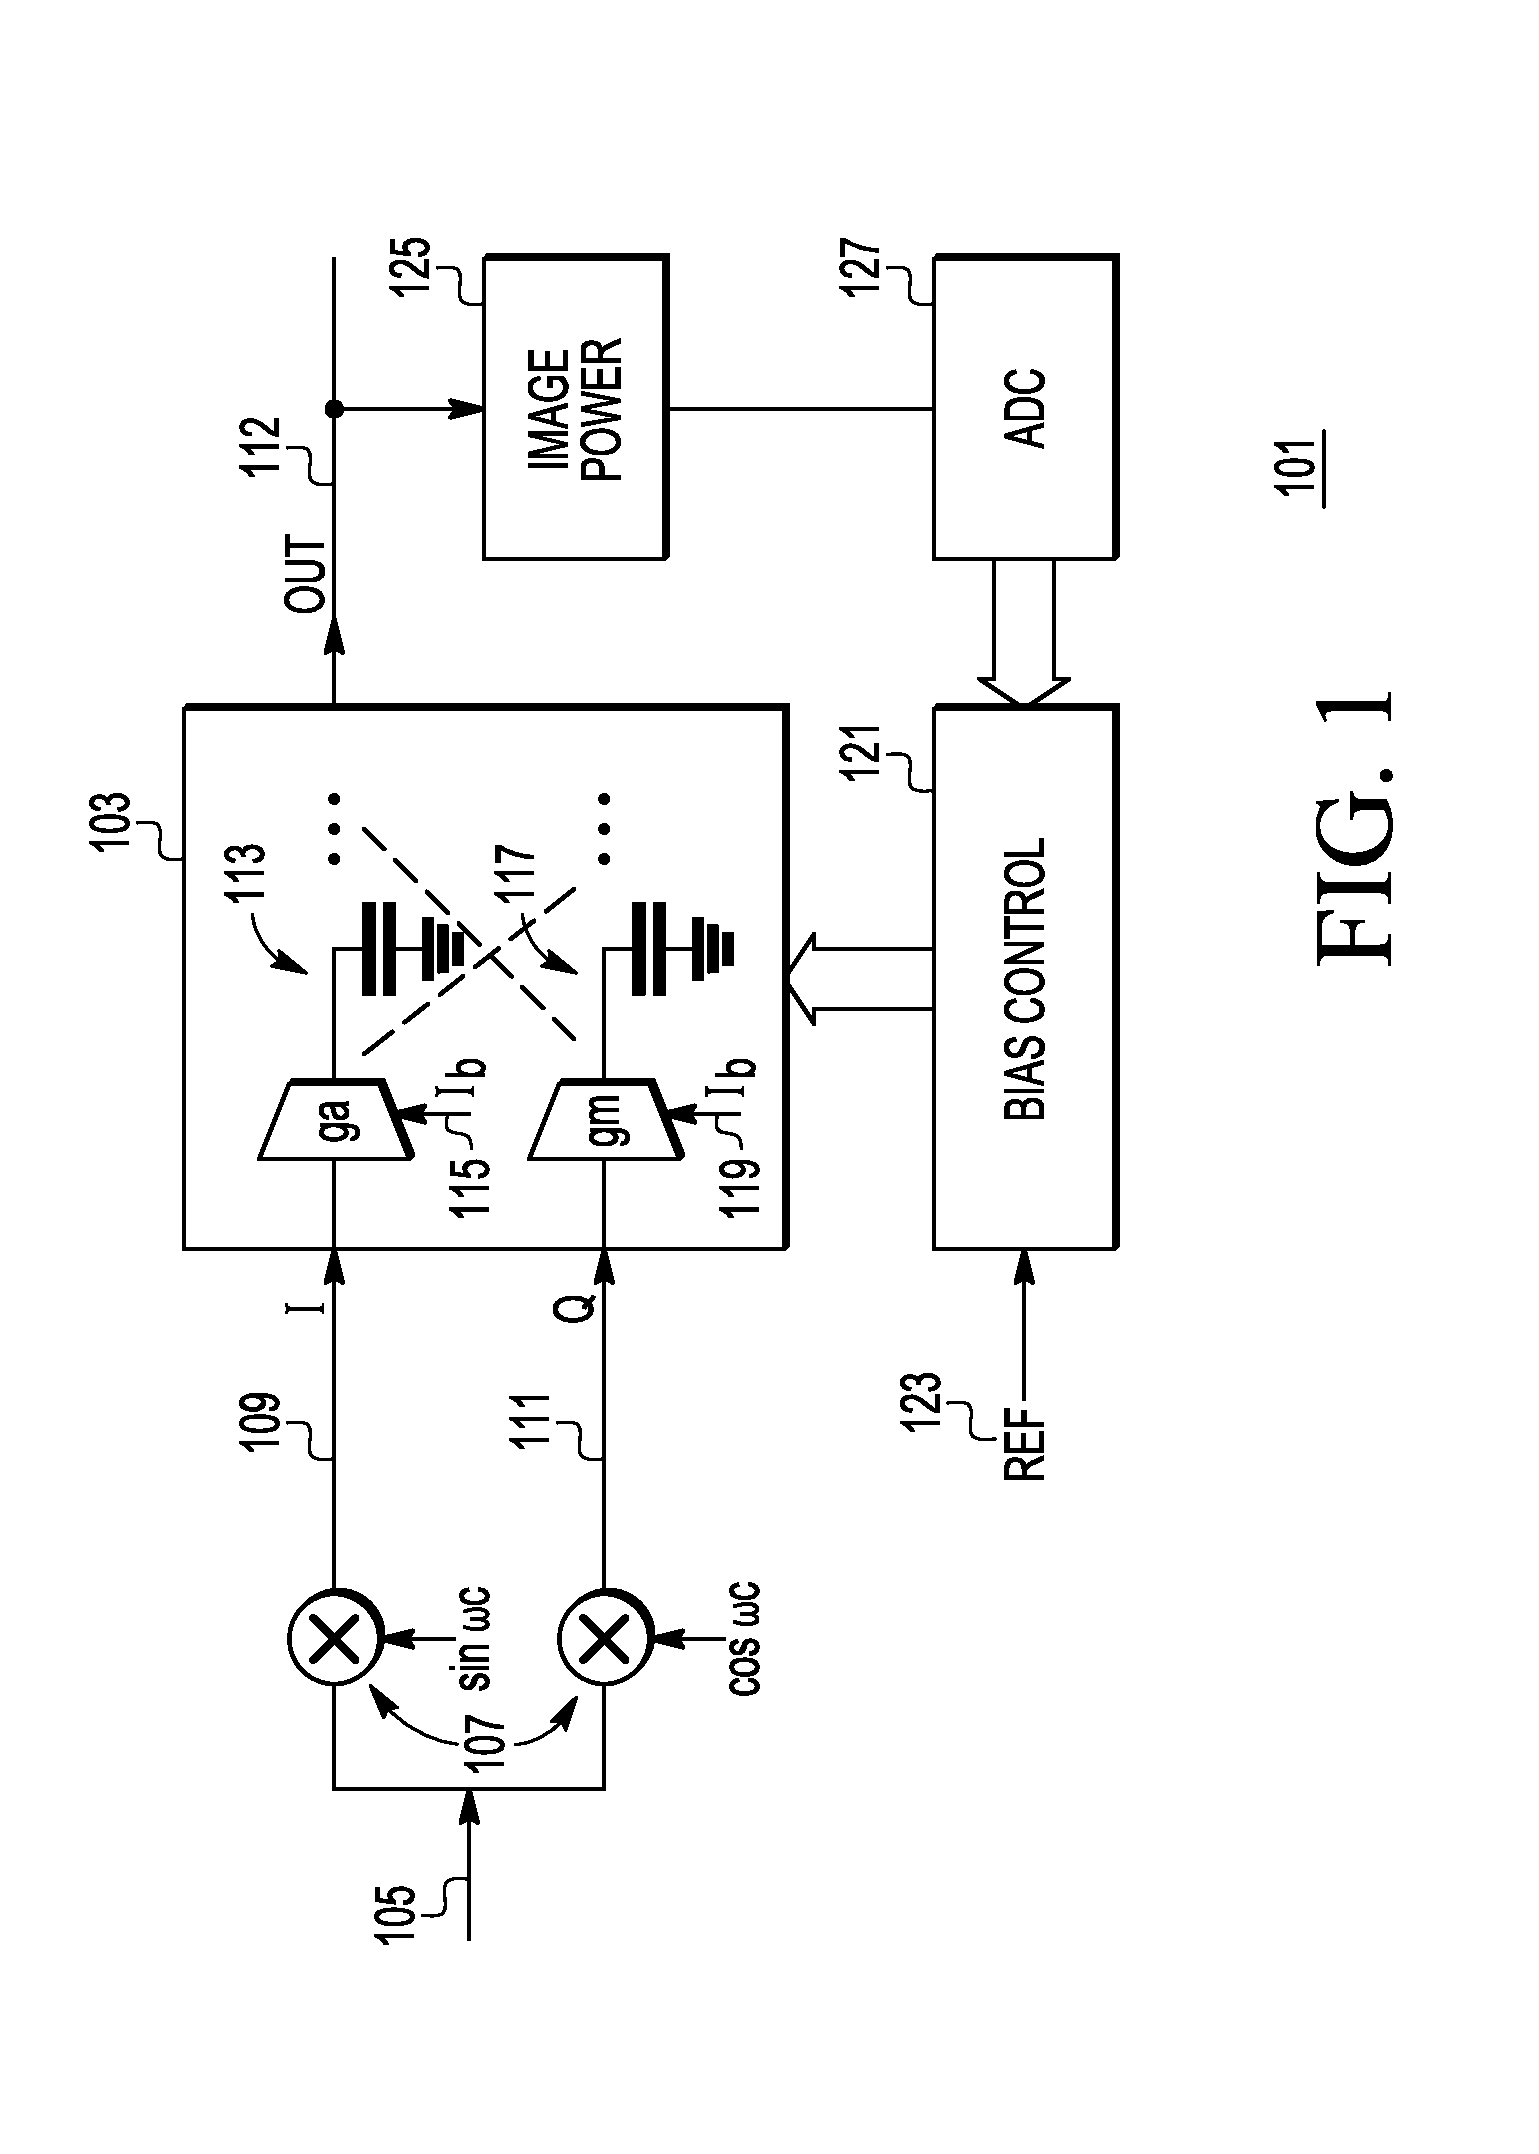 Image rejection for low if receivers